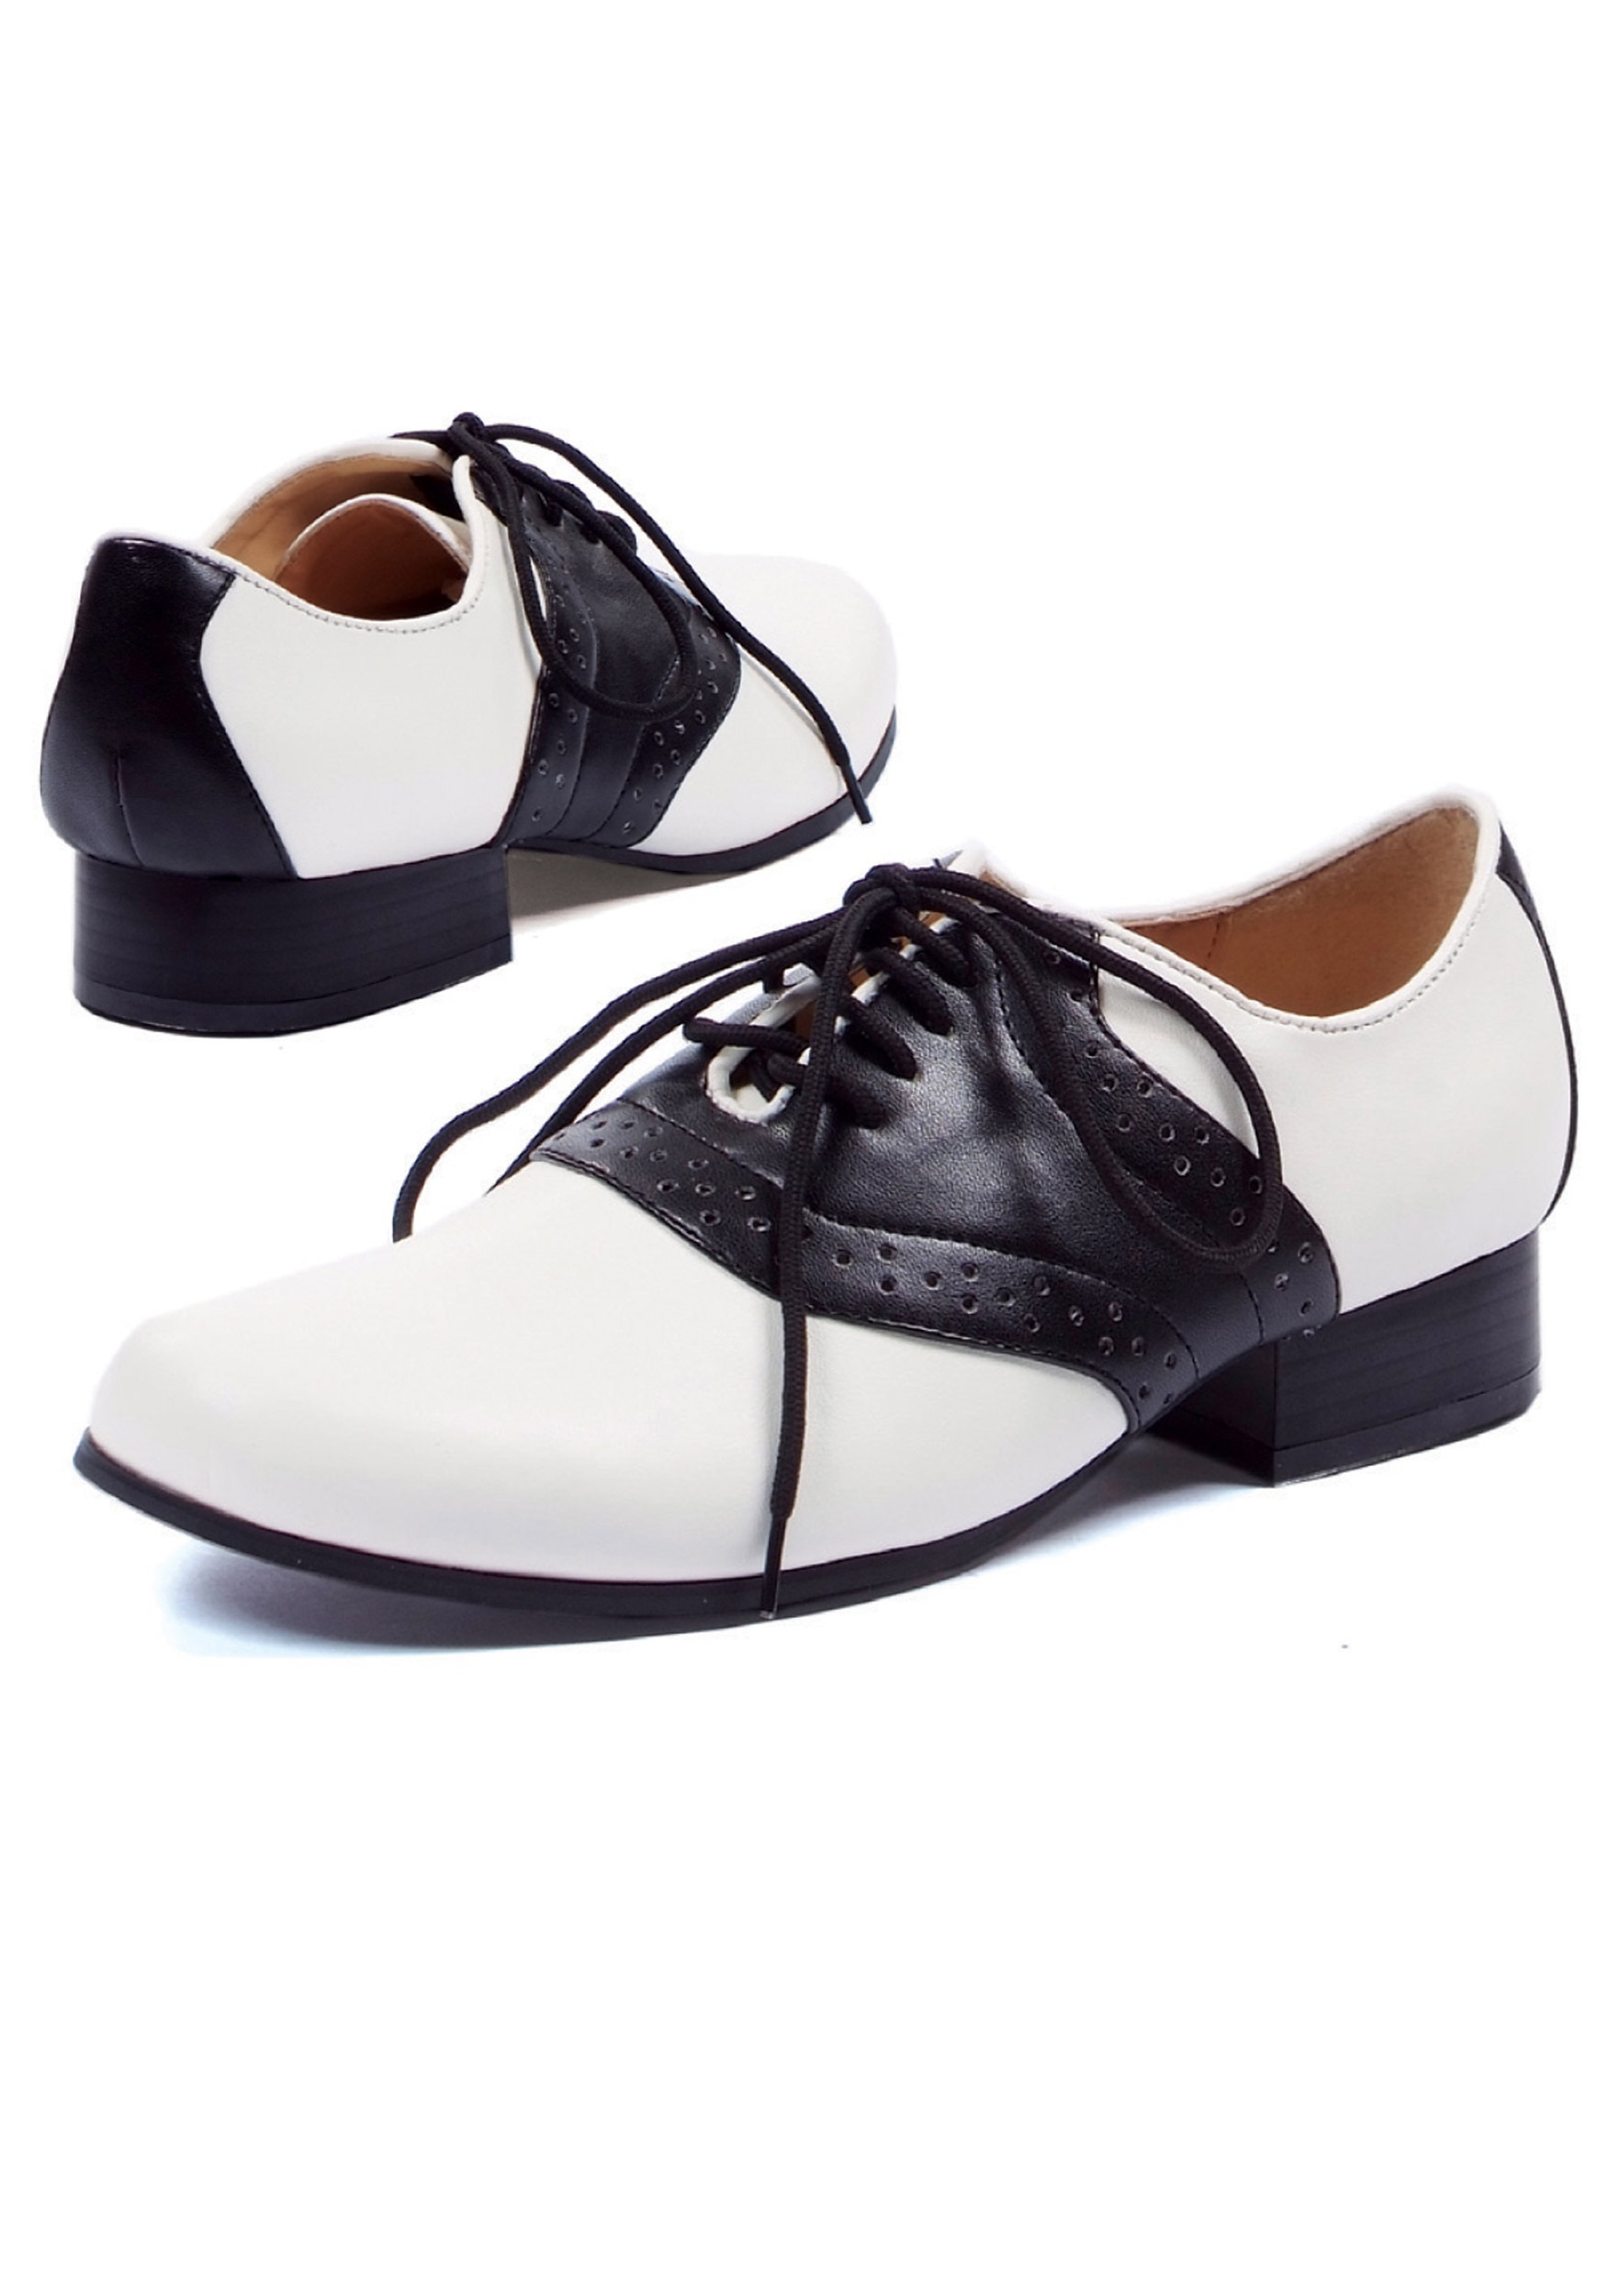 Normal victim channel 50s Saddle Shoes for Women